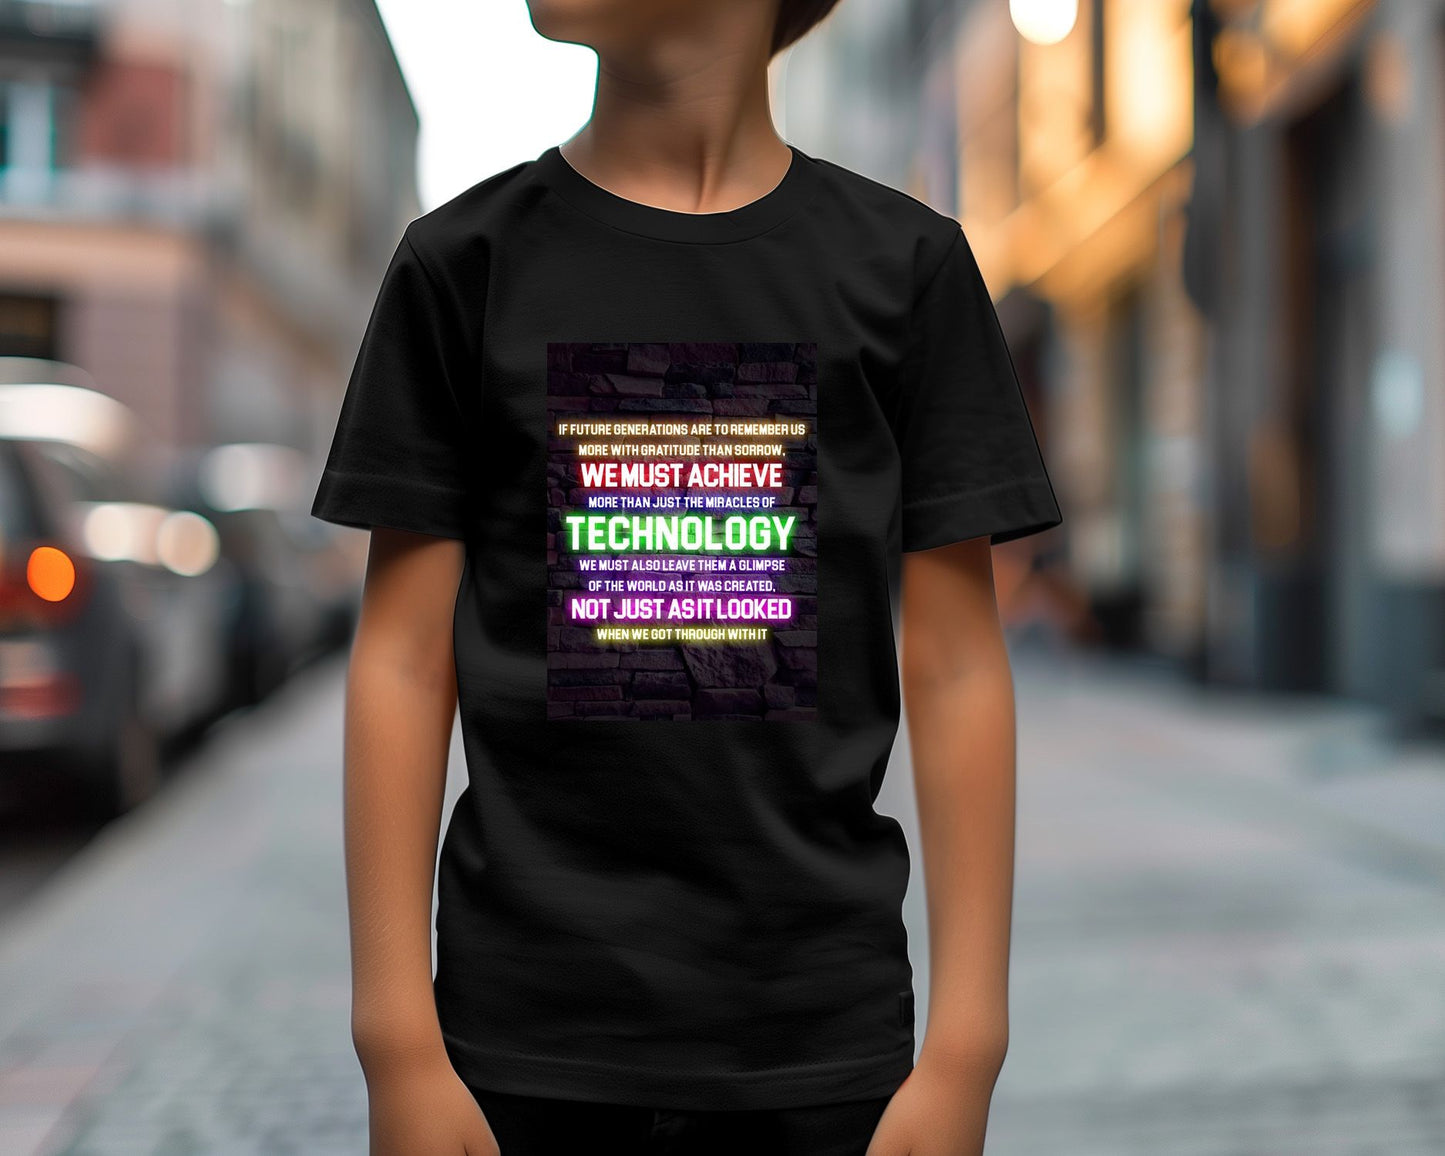 The Future of Technology - @ColorizeStudio